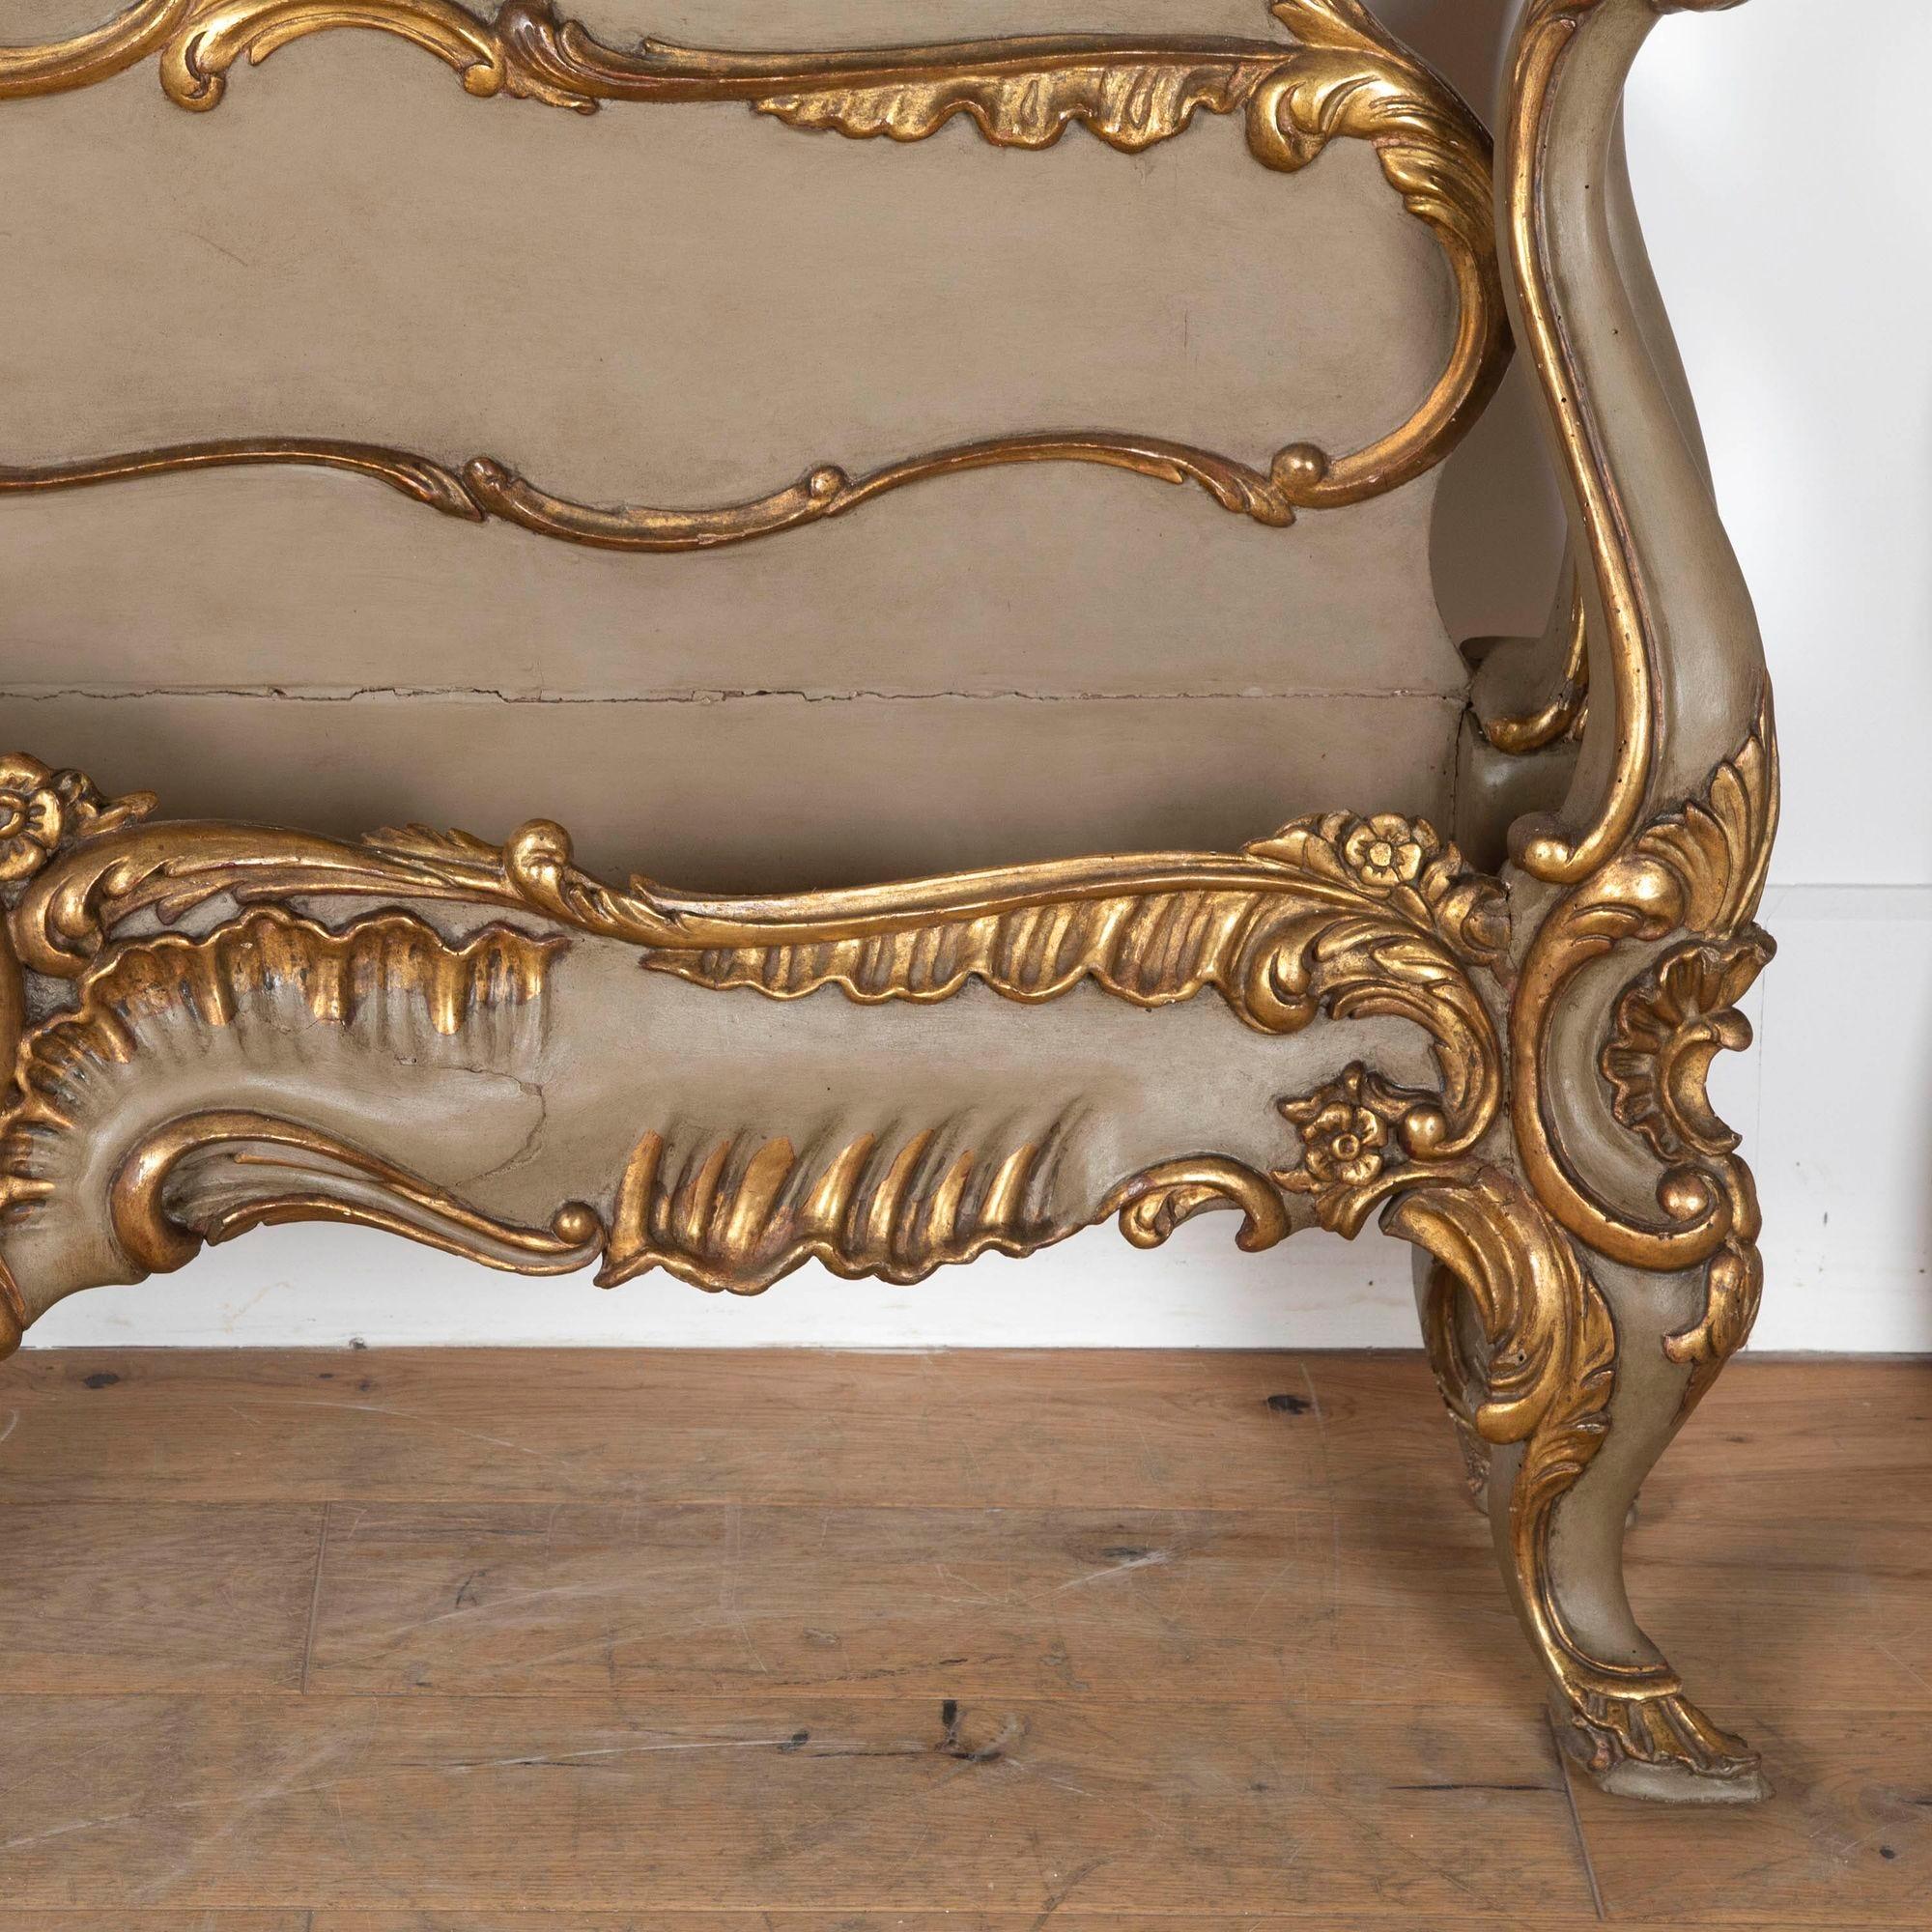 
Magnificent 19th Century Florentine Baroque giltwood super king size bedstead.
Beautiful hand carving with original gilding.
Pair of angels on the top of the headboard to watch over you while you sleep, with original hand-painted faces.
The bed